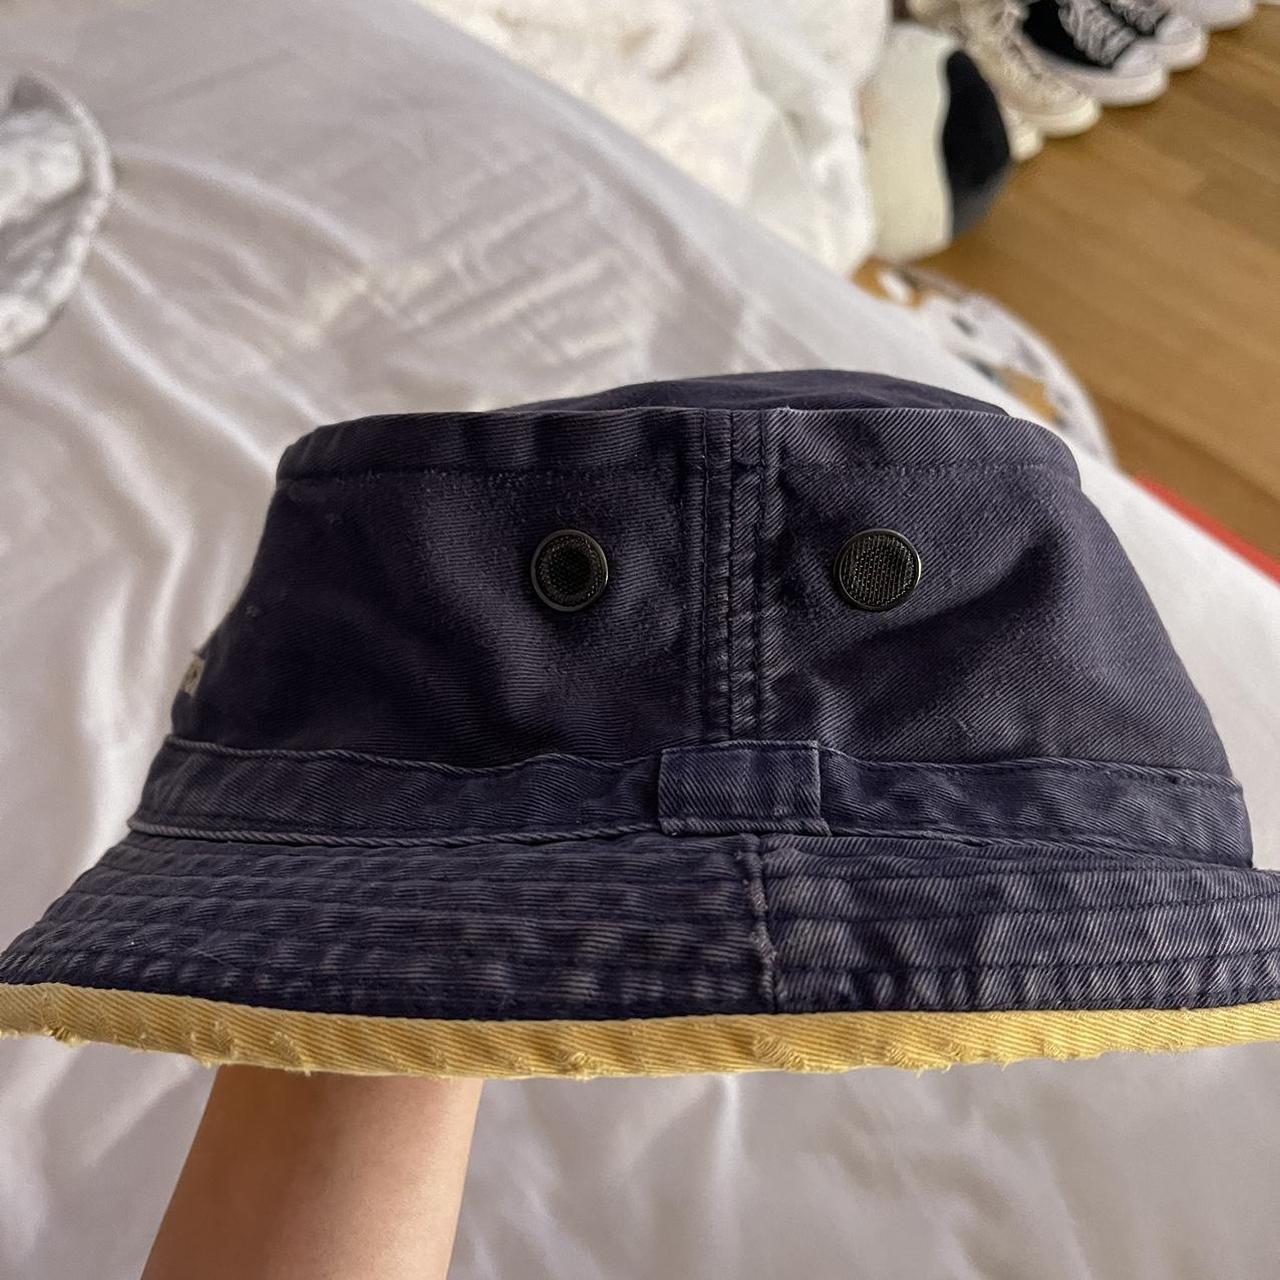 abercrombie and fitch vintage bucket hat navy blue - Depop